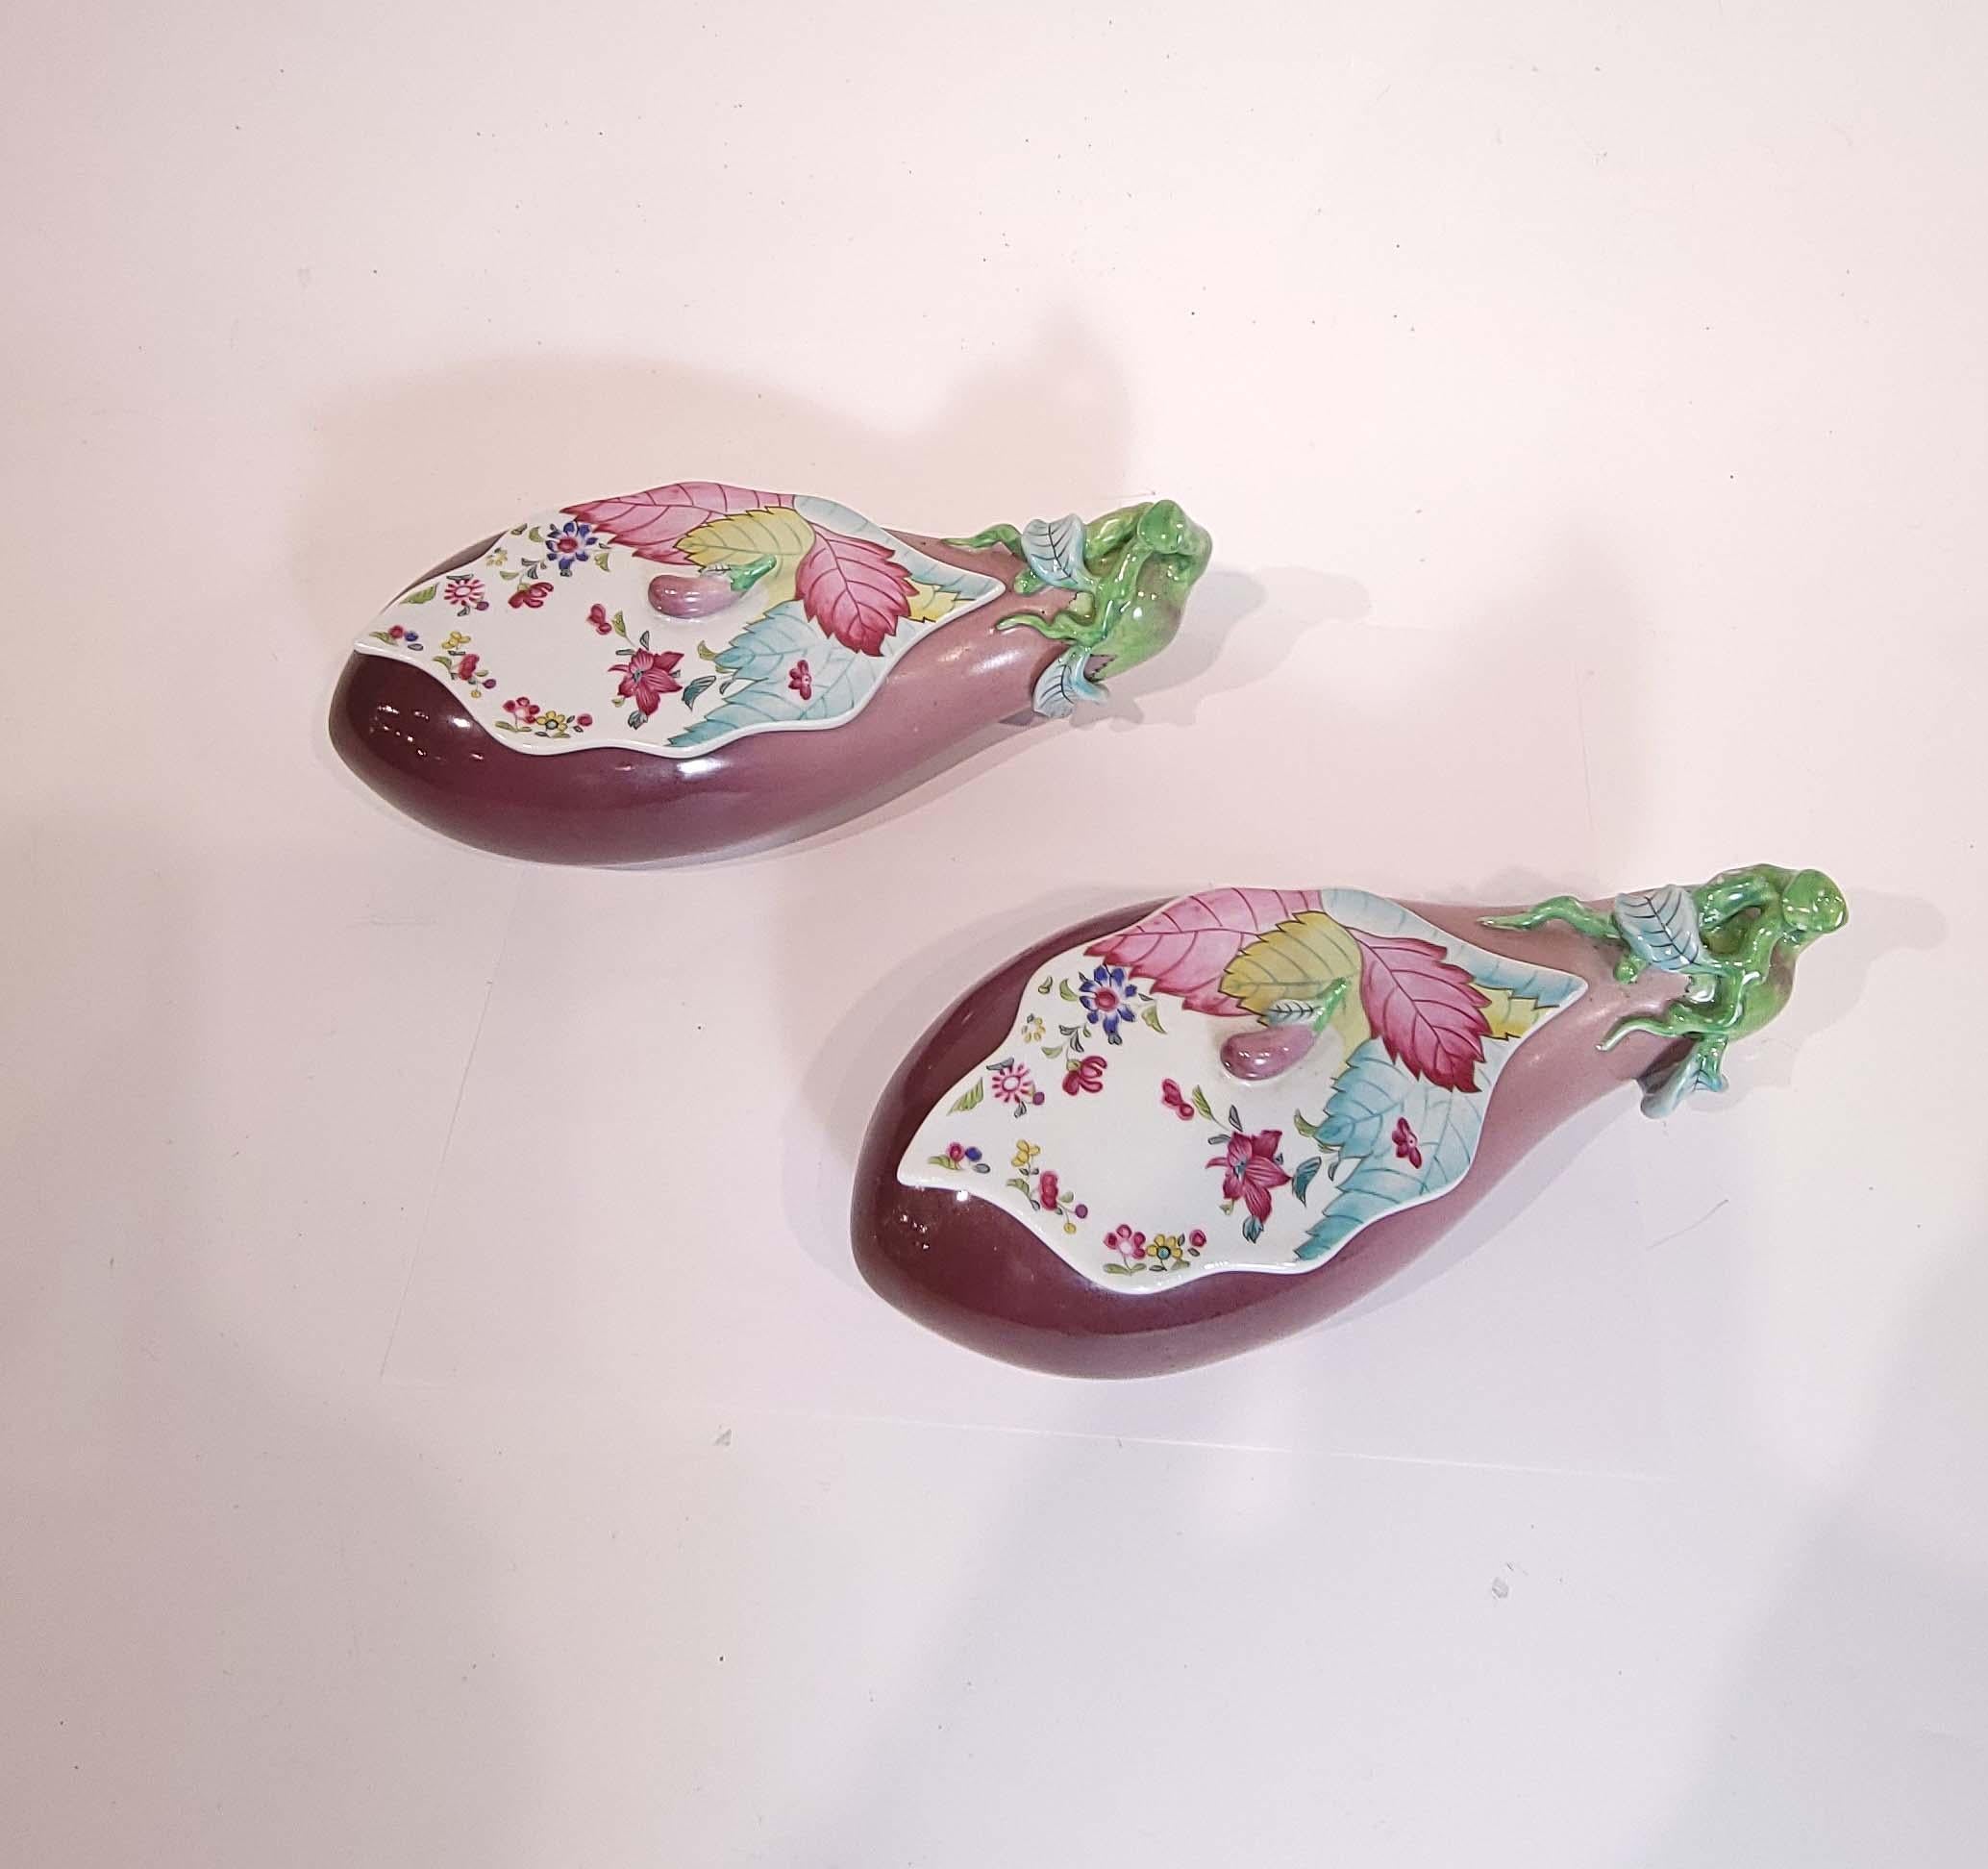 Portuguese Pair of Mottahedeh Nelson Rockefeller Collection Tobacco Leaf Covered Eggplants